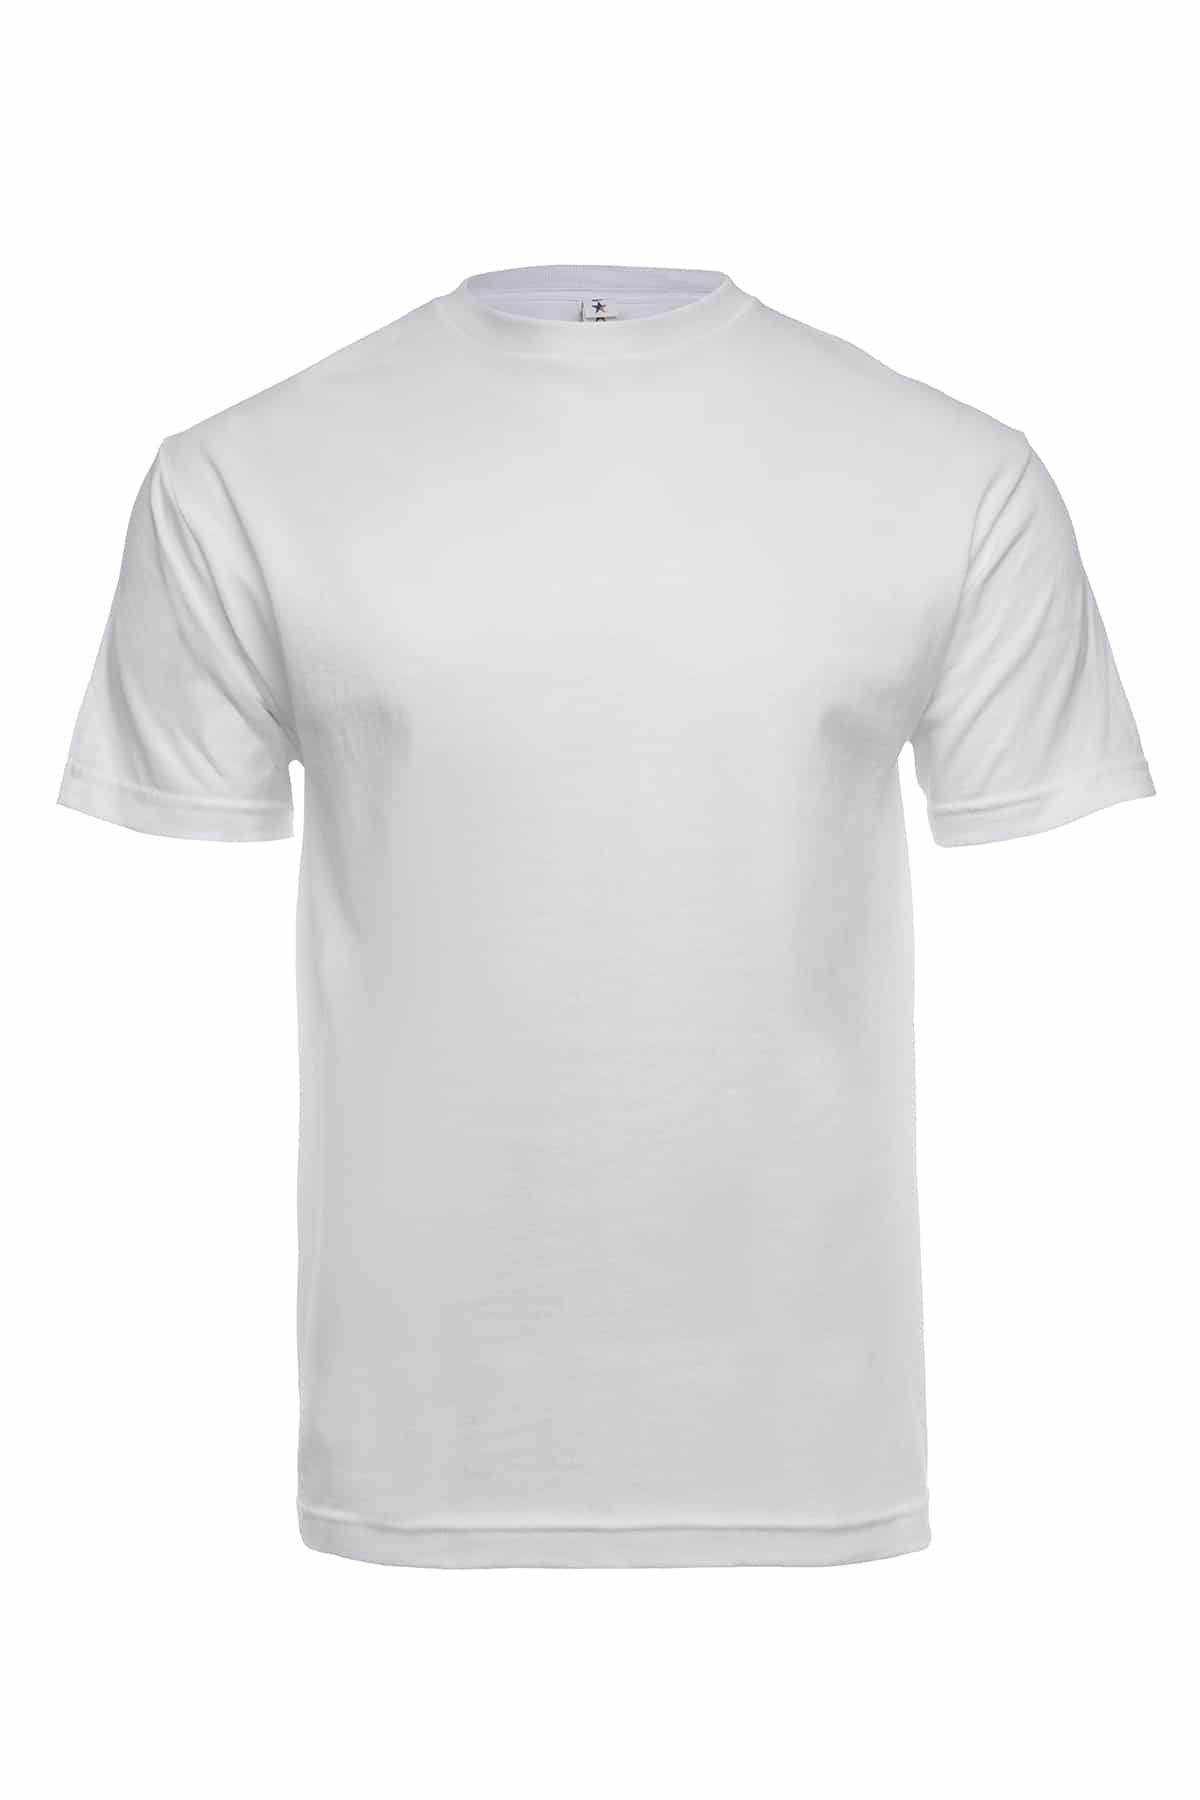 1301 White Front T-shirt